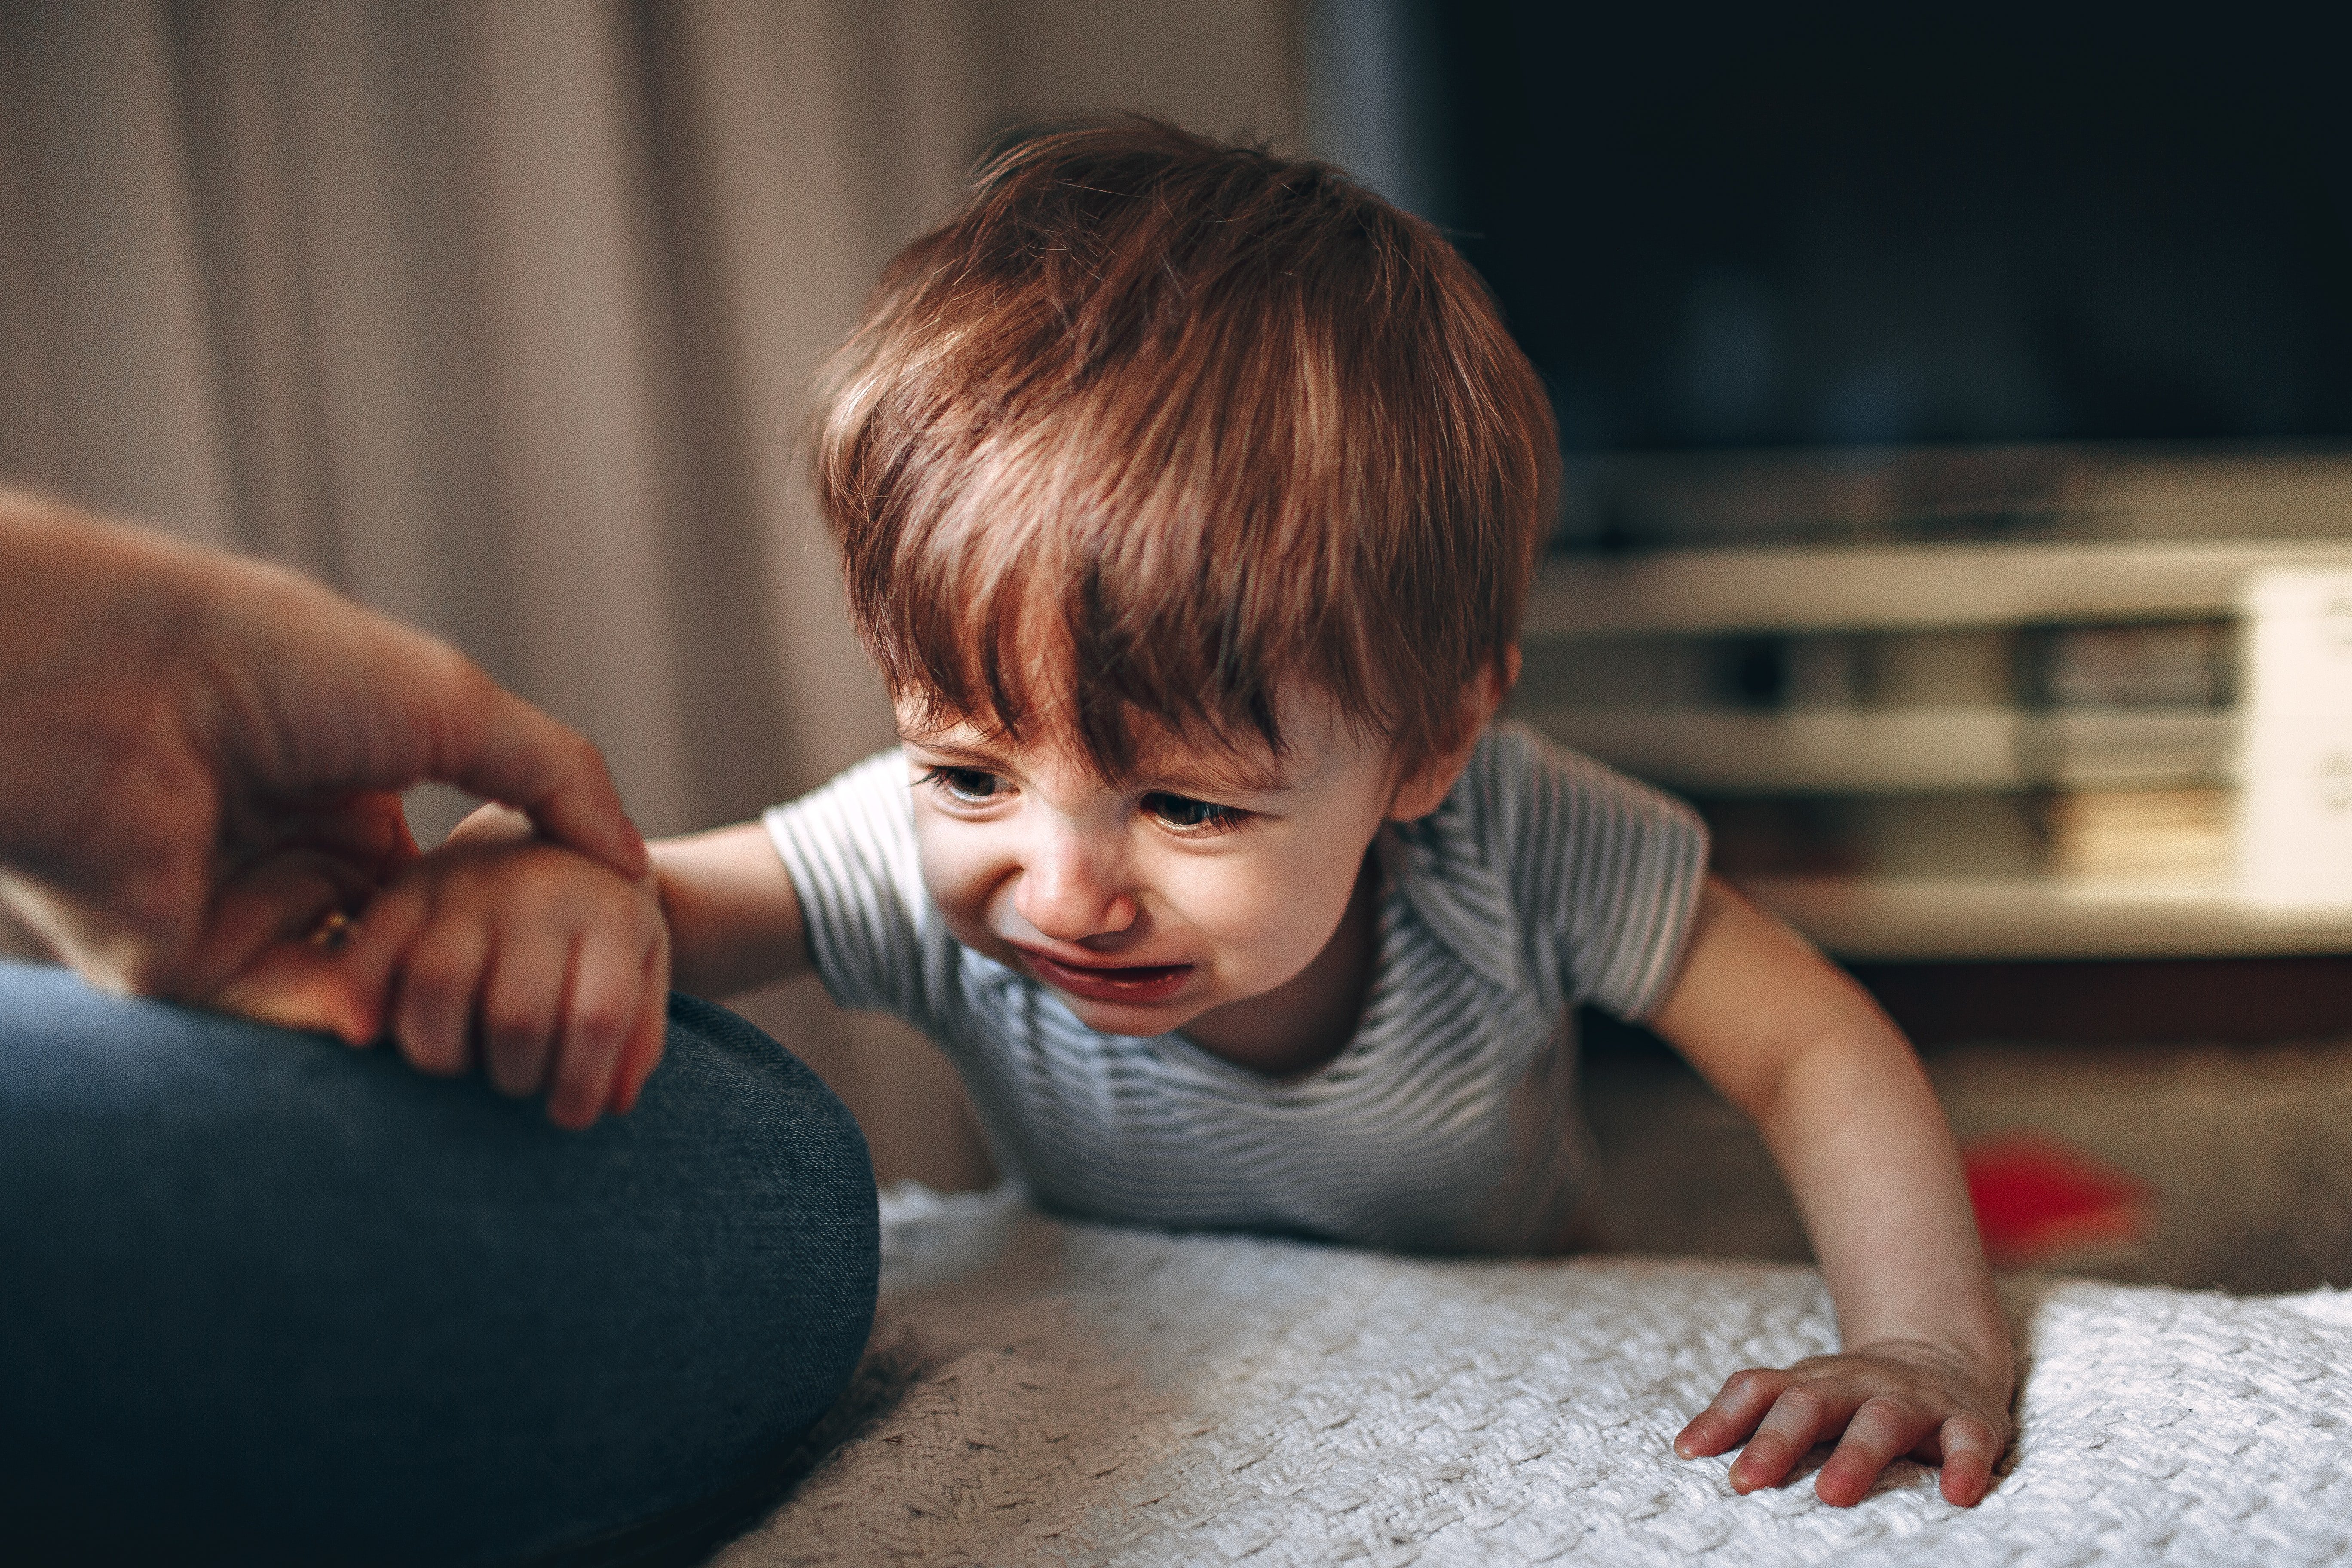 Pete was irritated by his grandson's constant crying. | Source: Unsplash